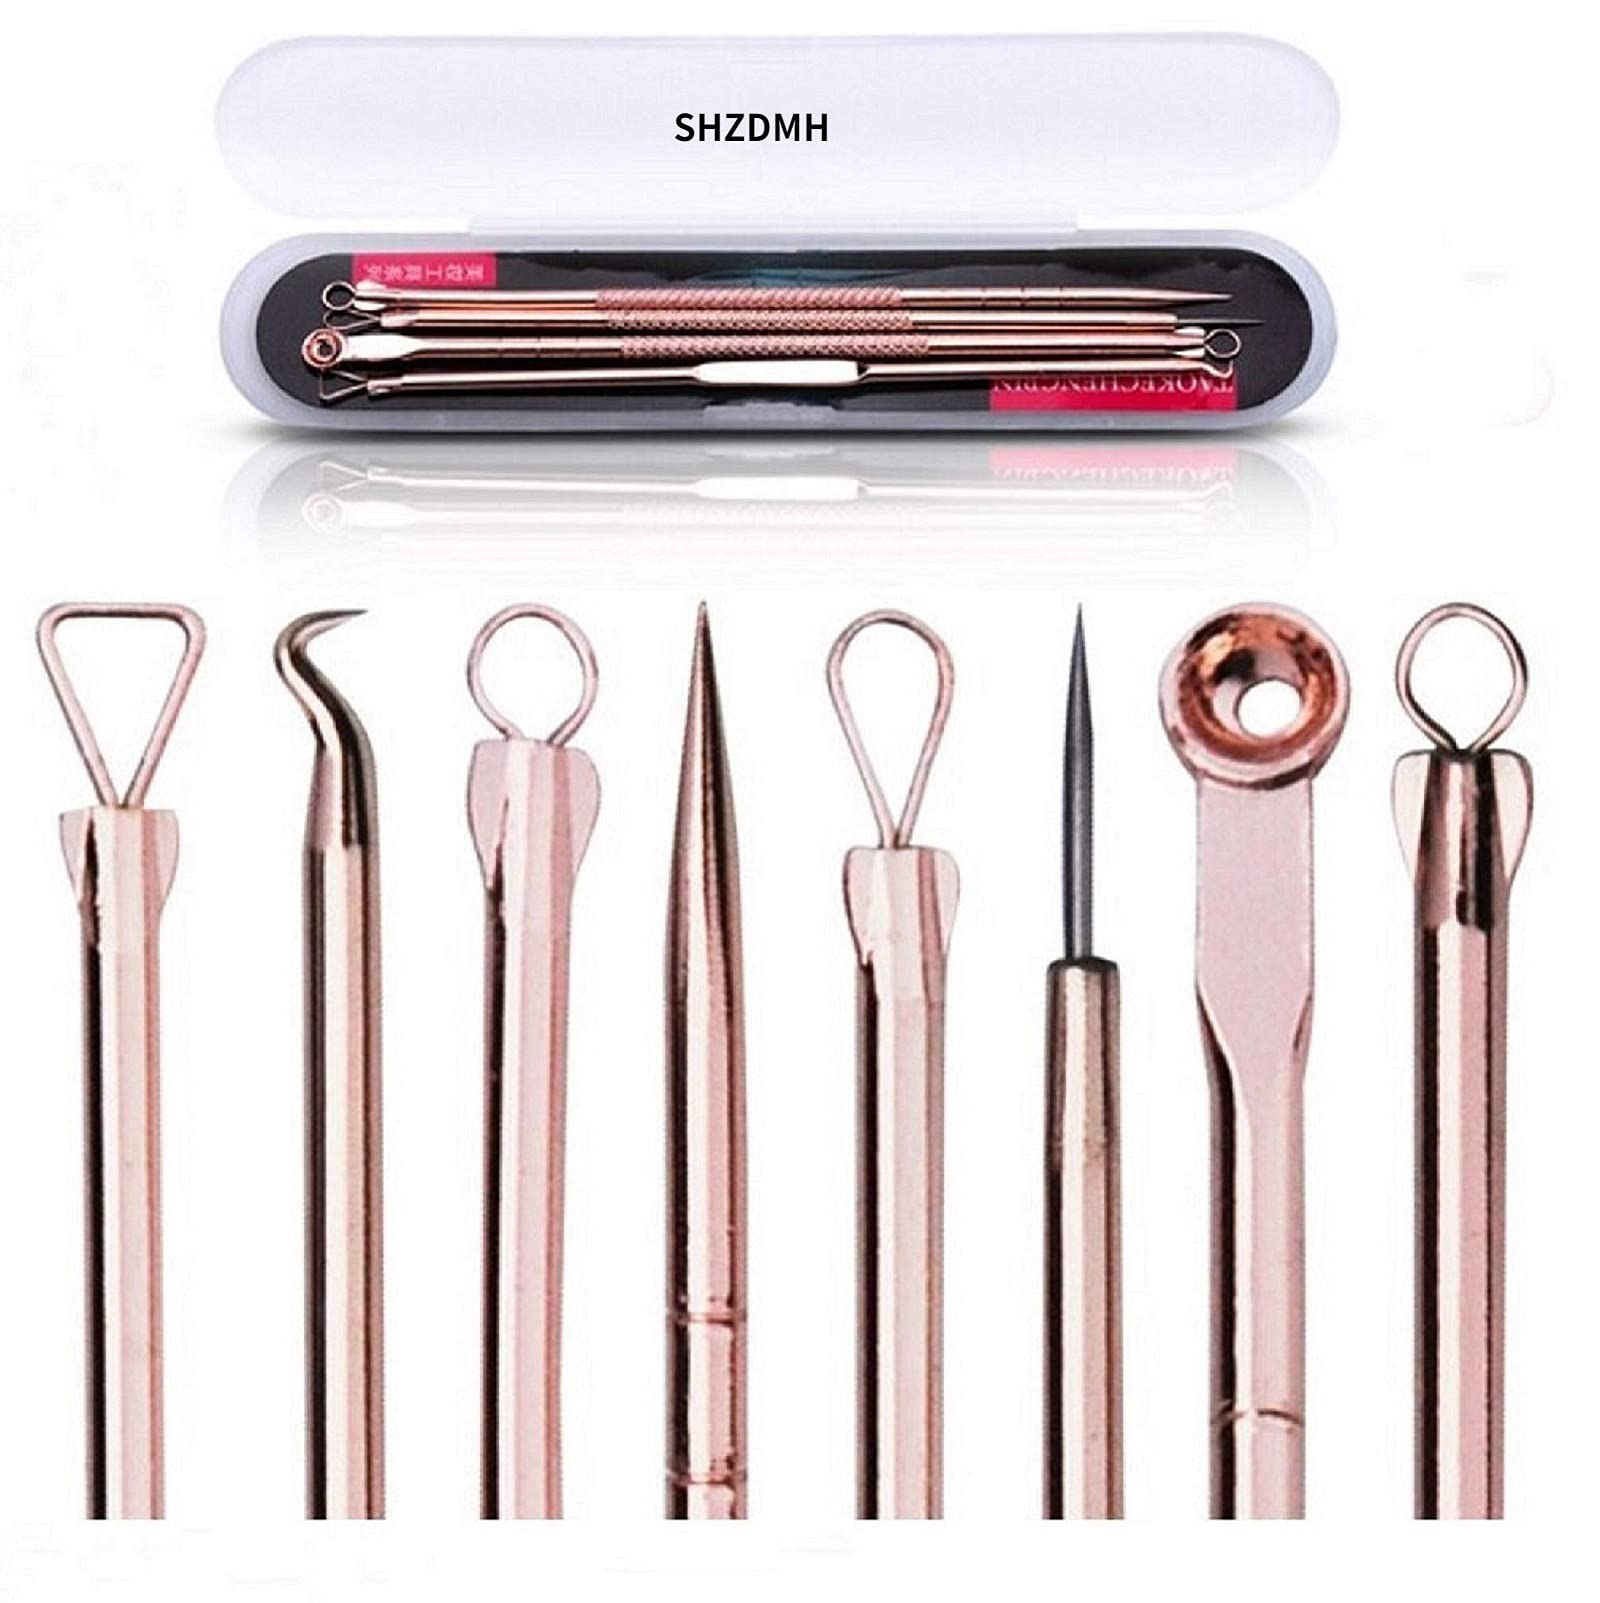 Blackhead Remover Pimple Comedone Extractor Tool Acne Kit